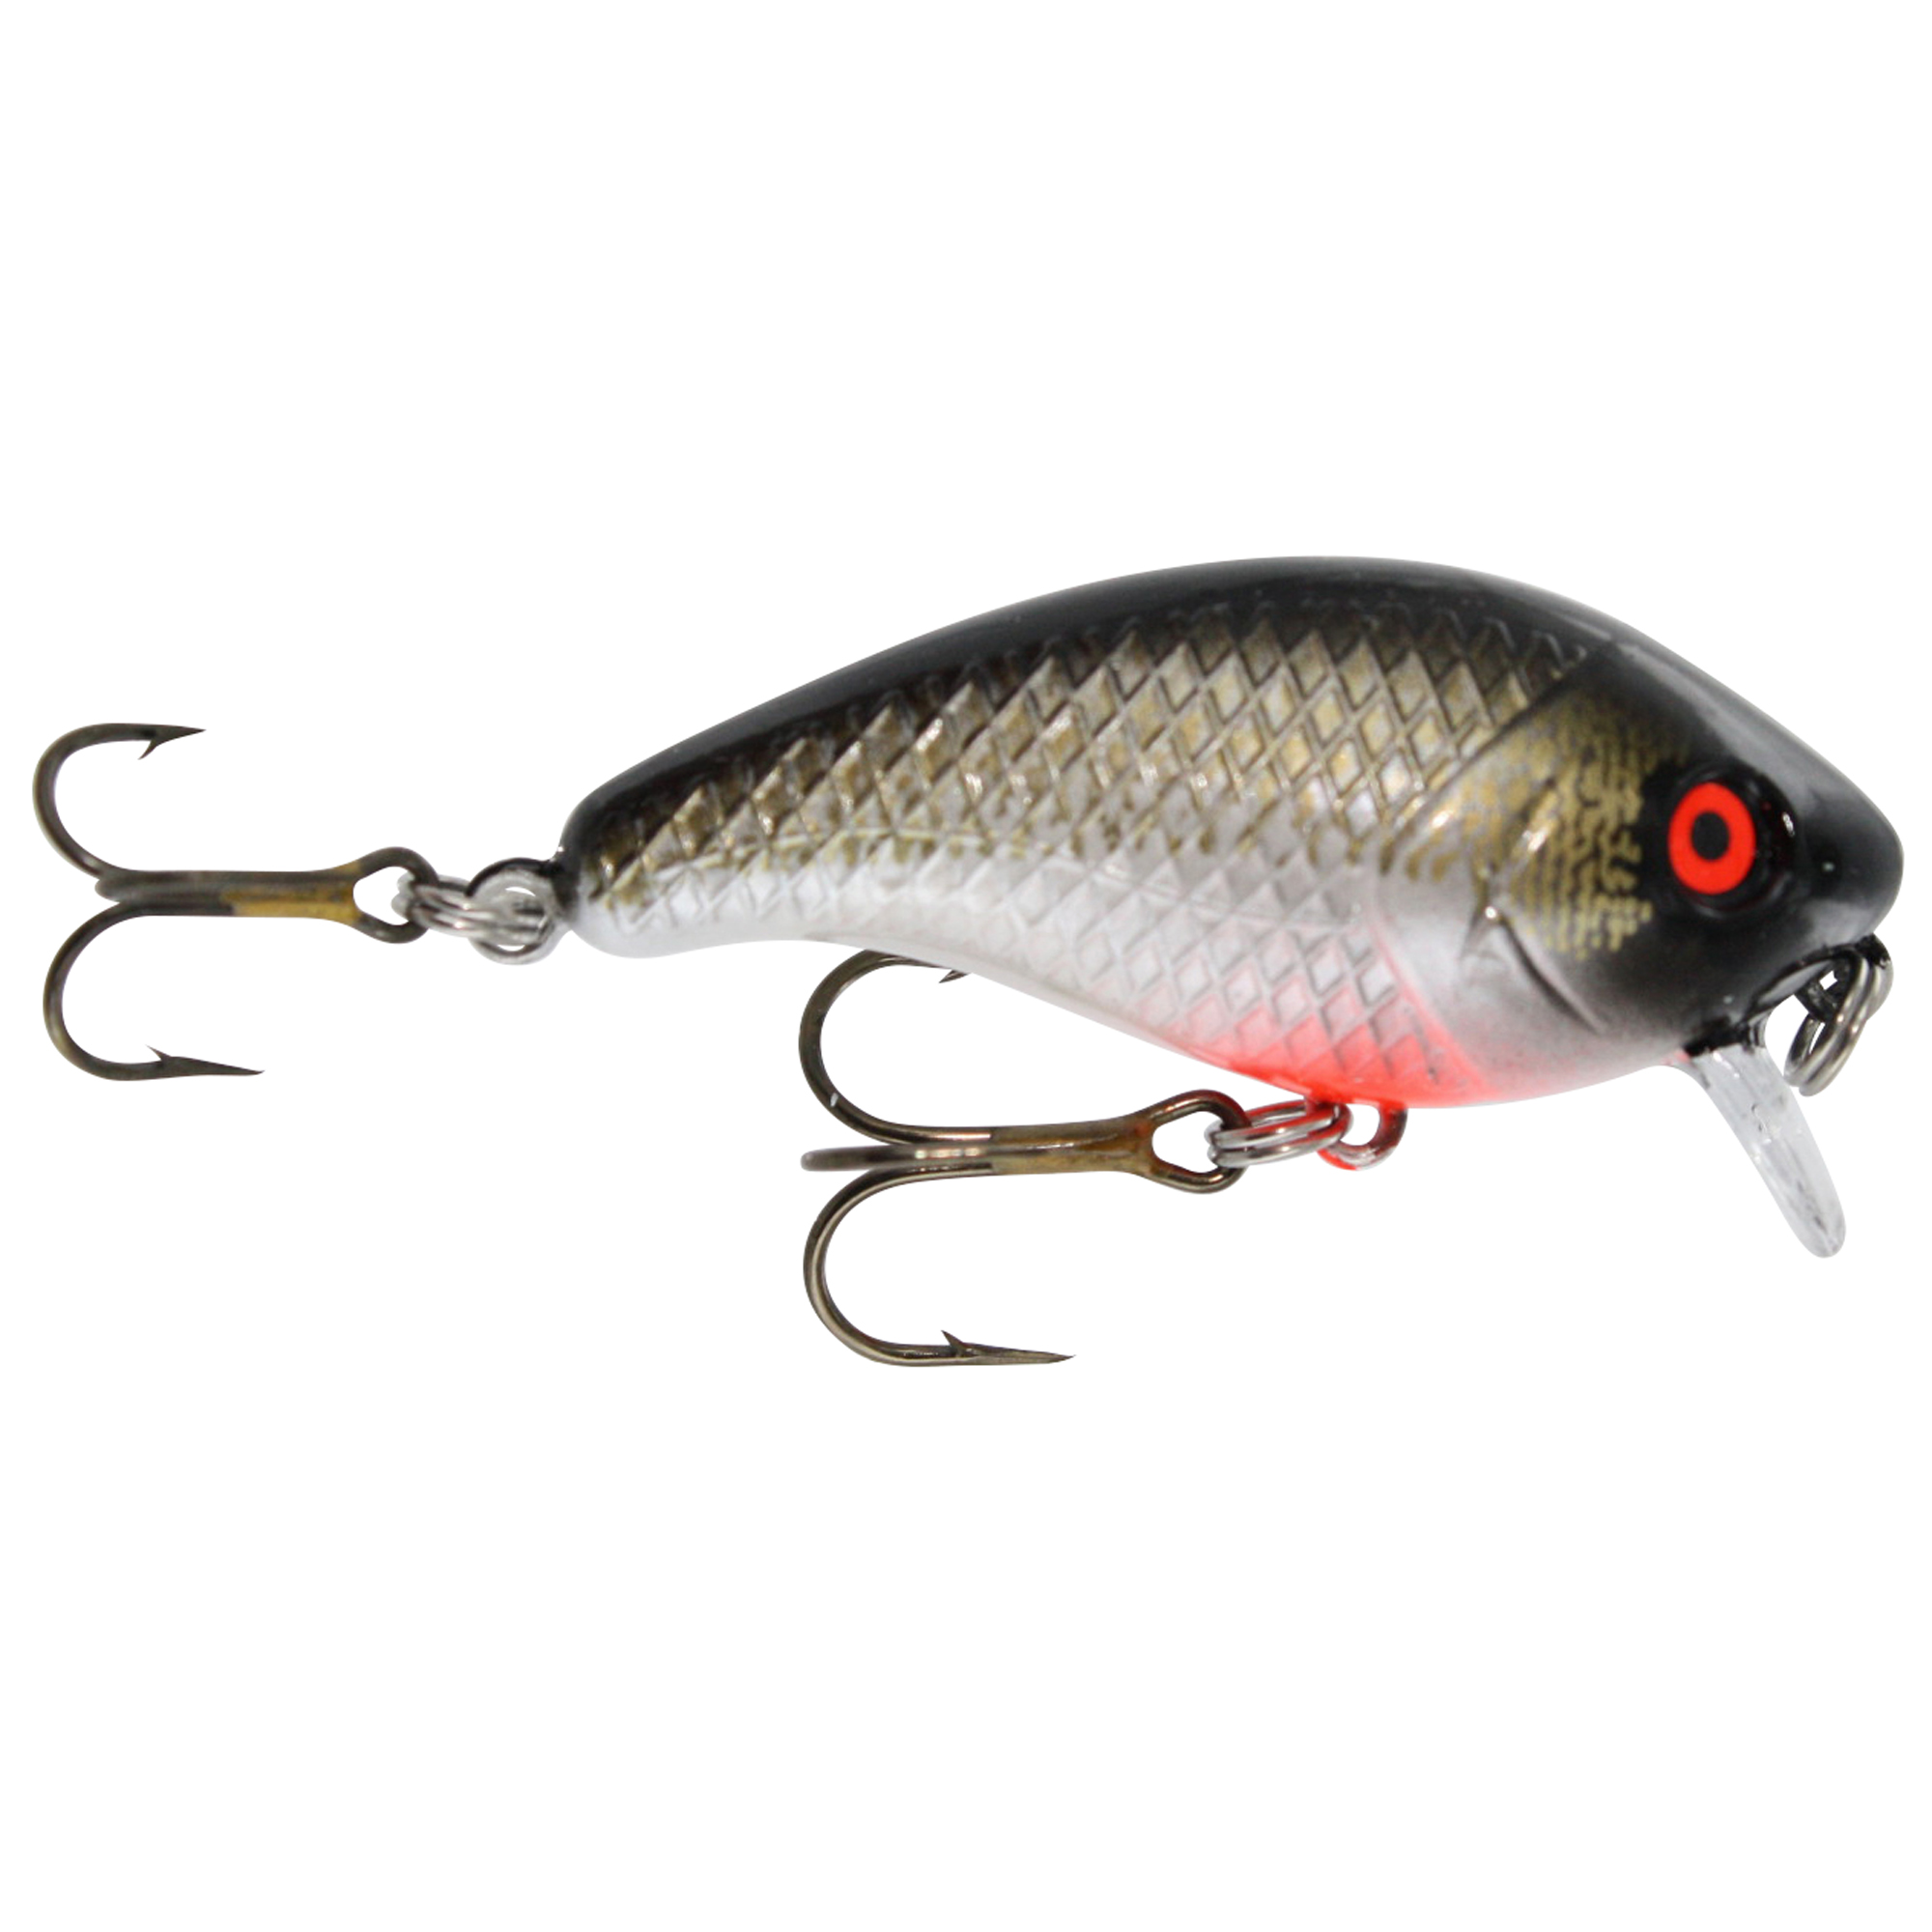 Minus SB4E-6 the WORLD'S #1 Shallow Lure for Bass Mann's Elite Series Baby1 